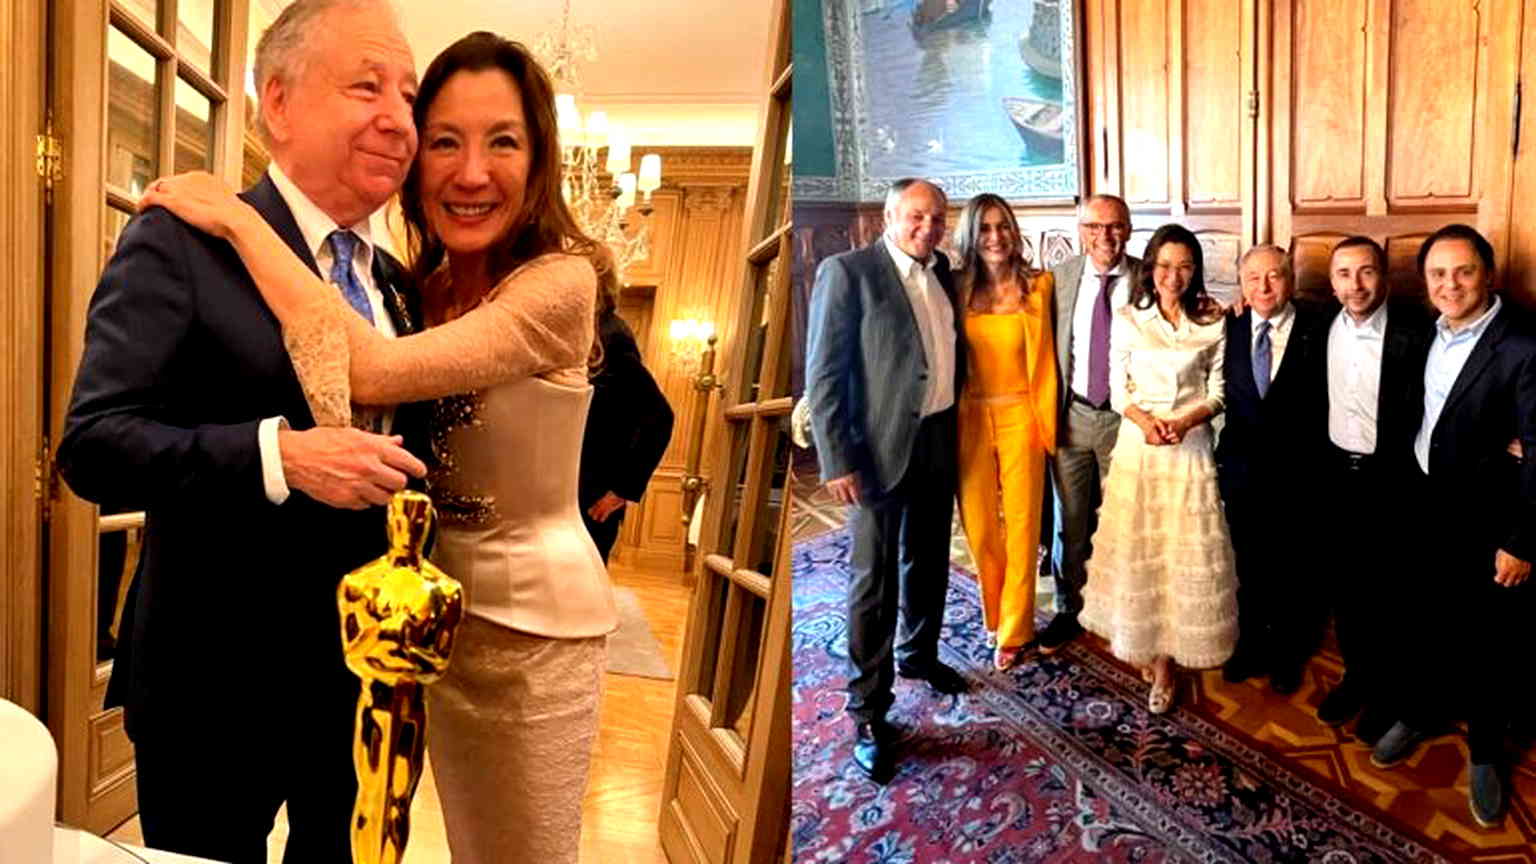 Michelle Yeoh marries former Ferrari CEO after 19-year engagement